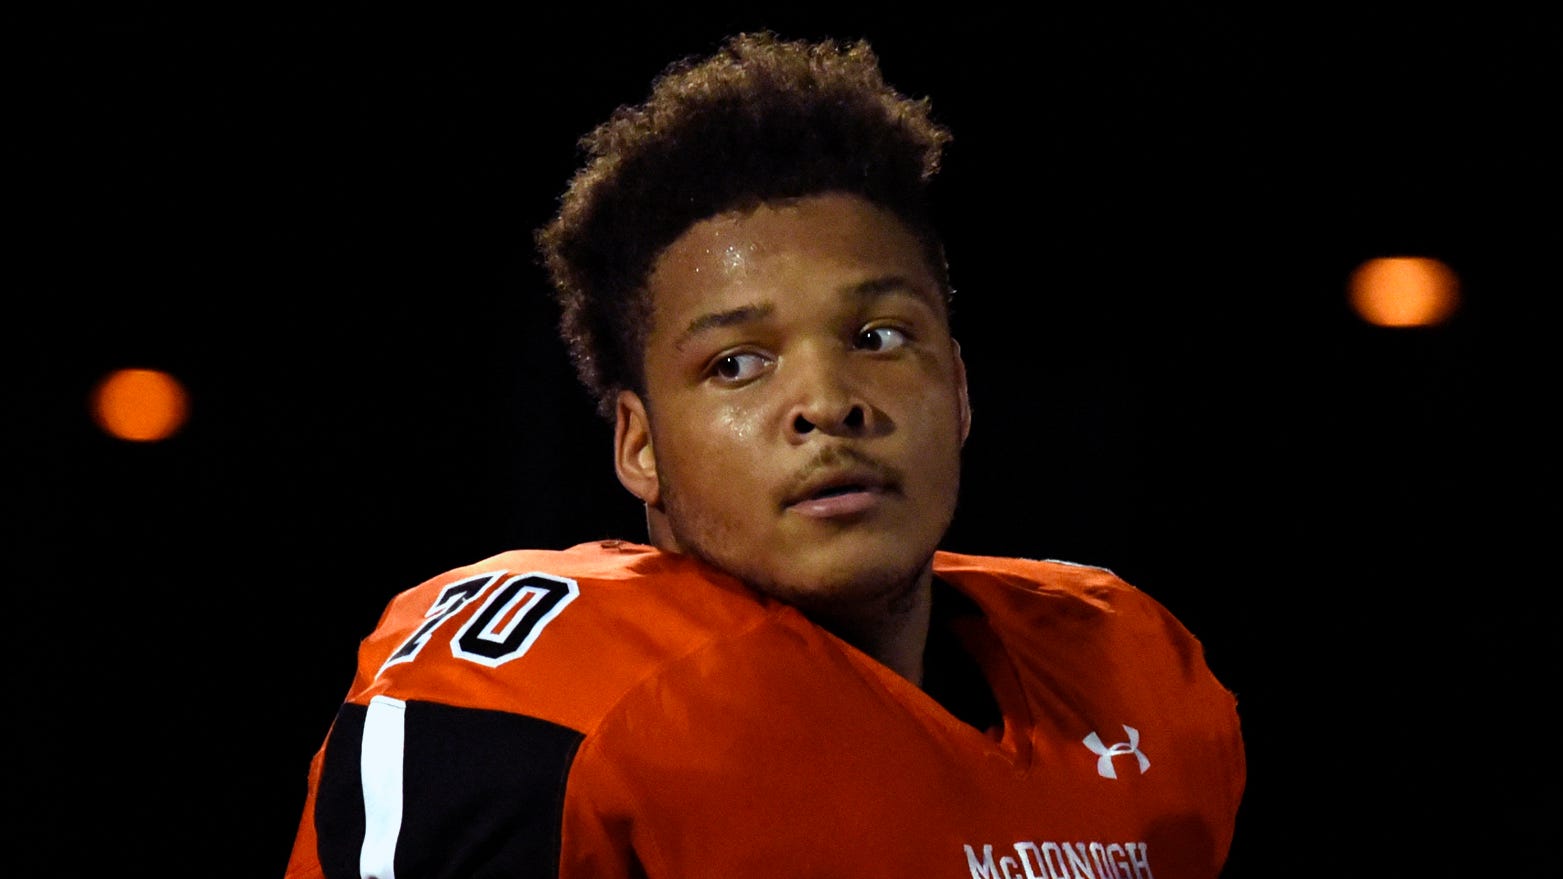 Maryland to settlement with family of Jordan McNair